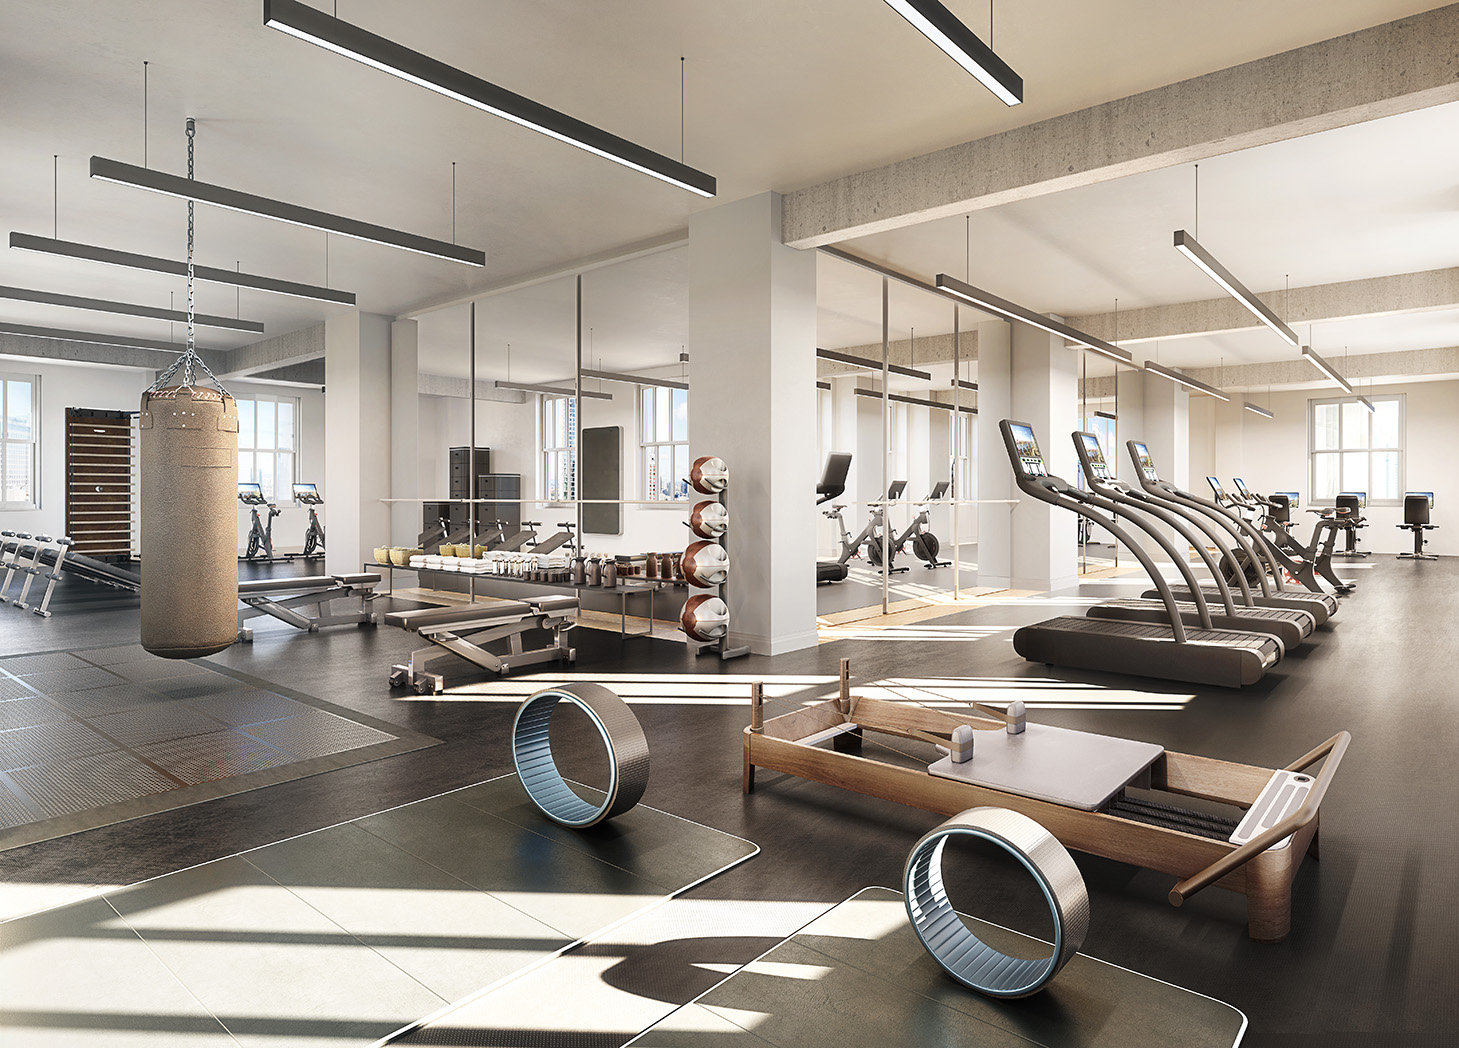 One Wall Street One Club gym filled with pilates, yoga, weightlifting, running, biking, and boxing equipment.